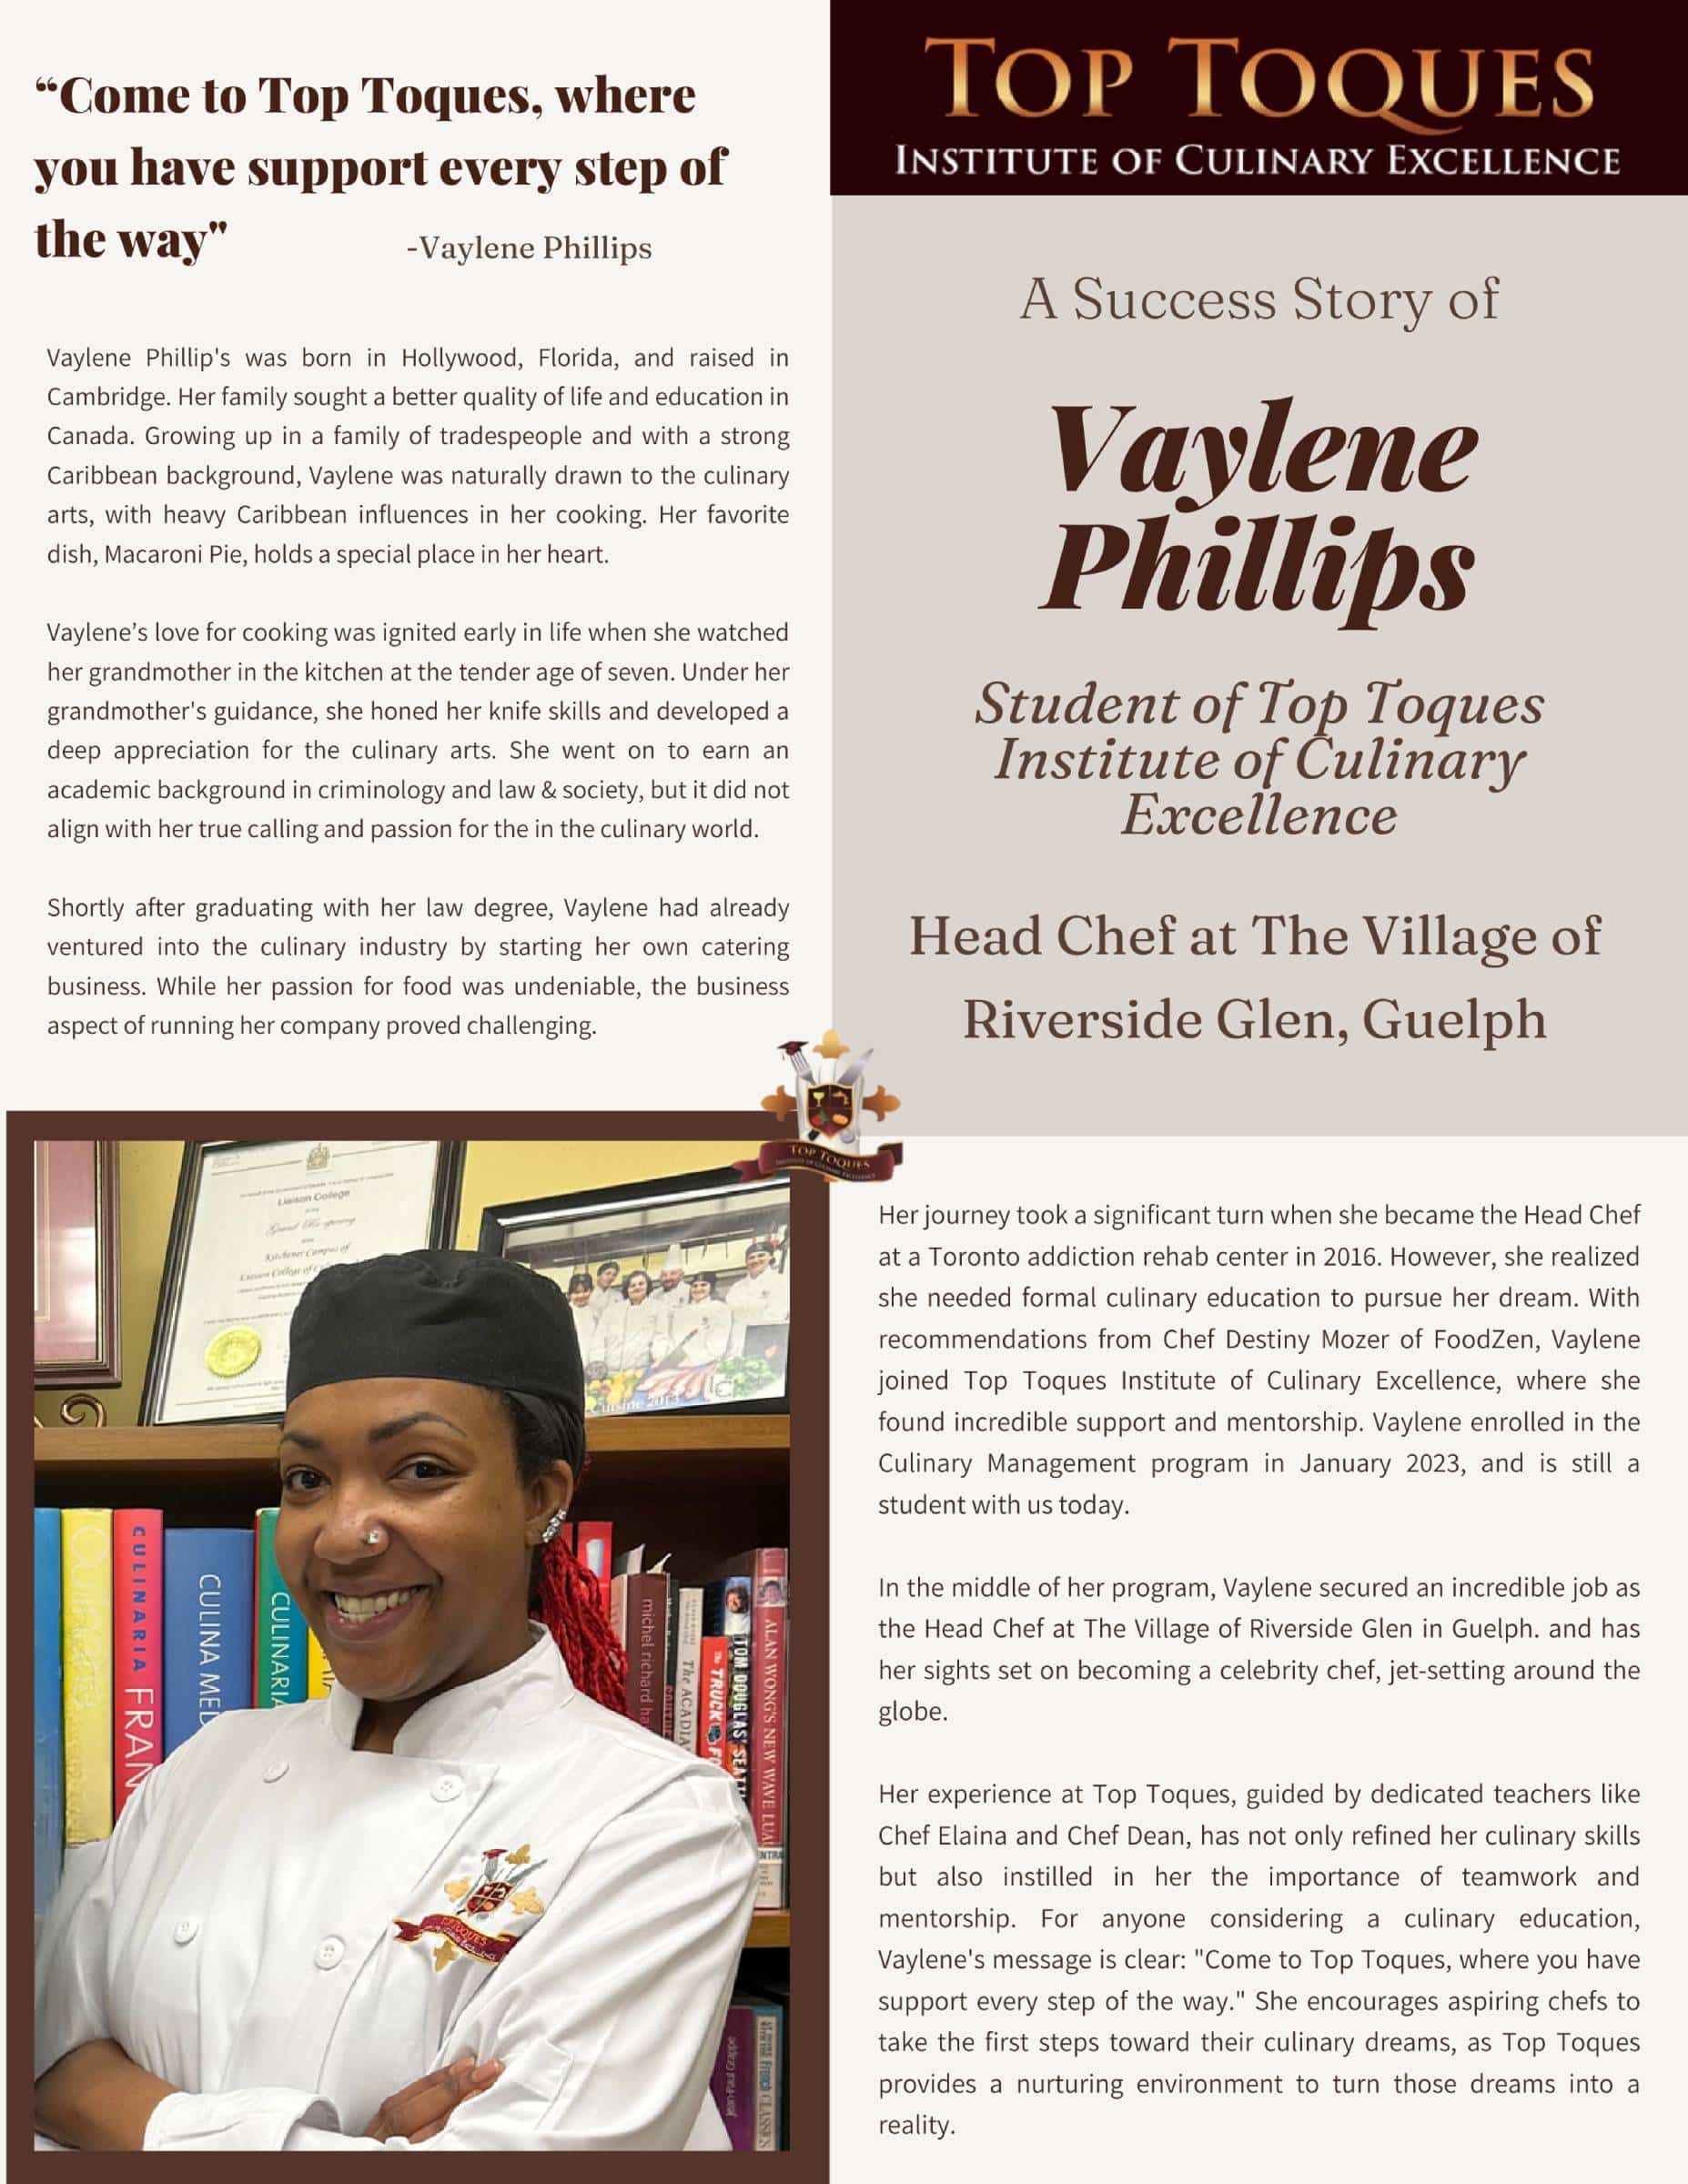 Student Success Story - Vaylene Phillips - Document - Top Toques Institute of Culinary Excellence